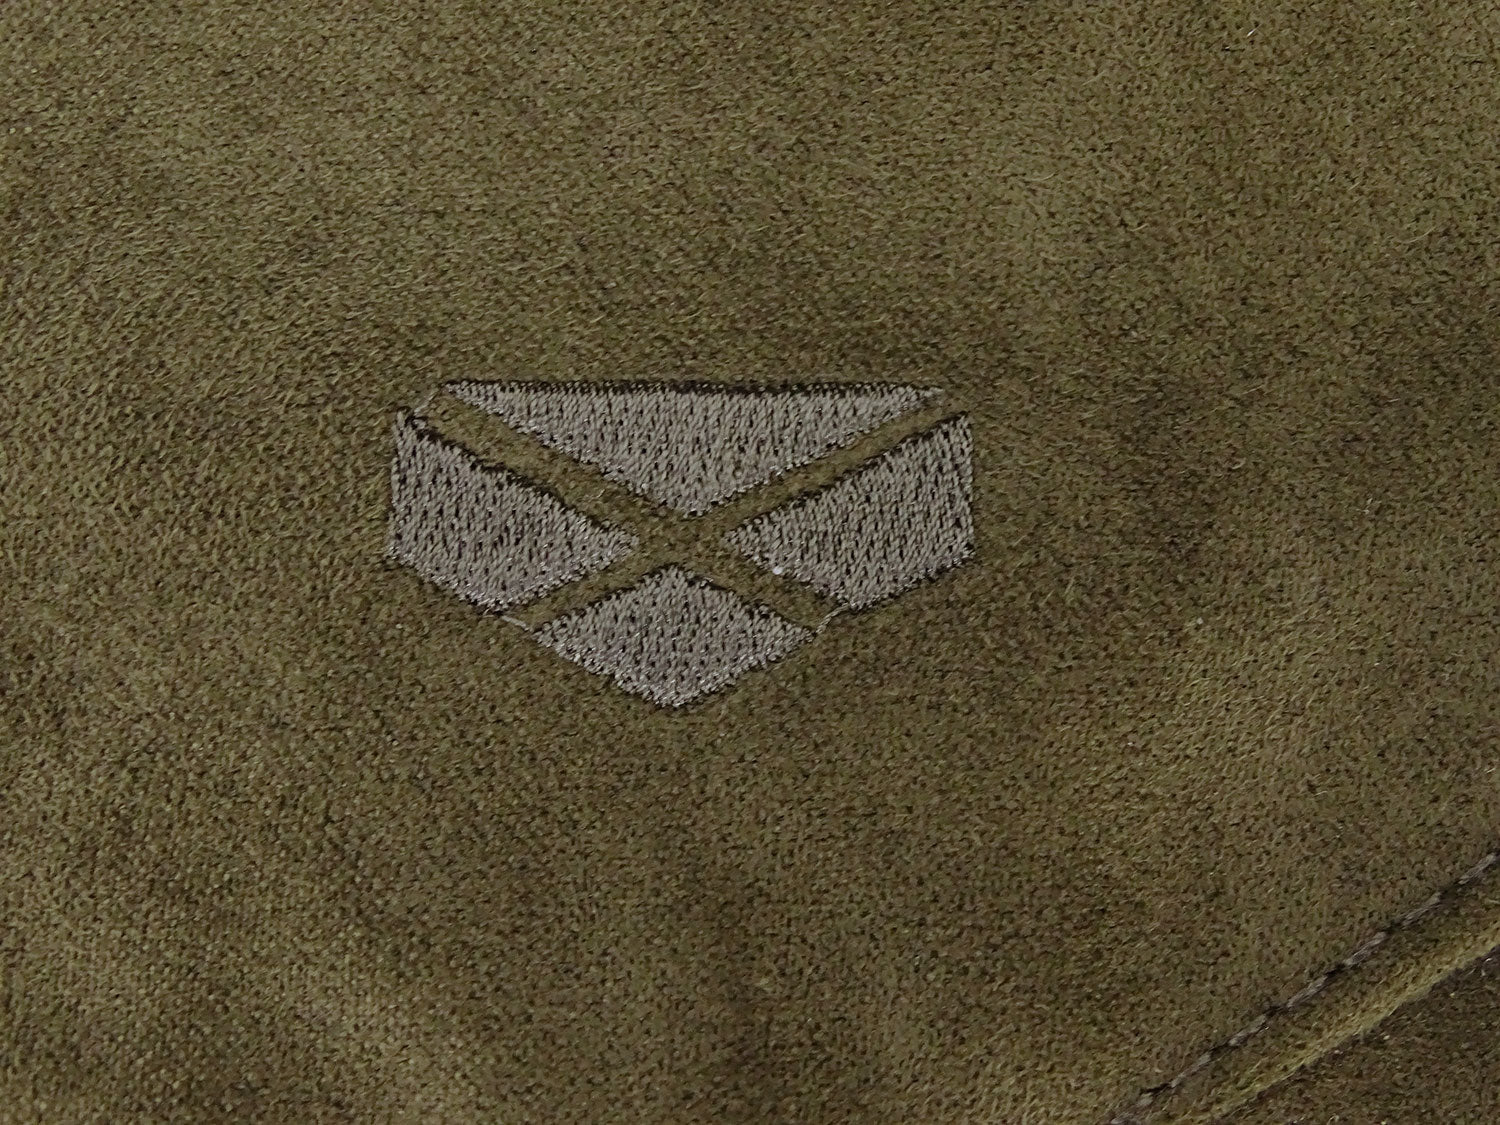 Hoggs Logo on Suede trousers